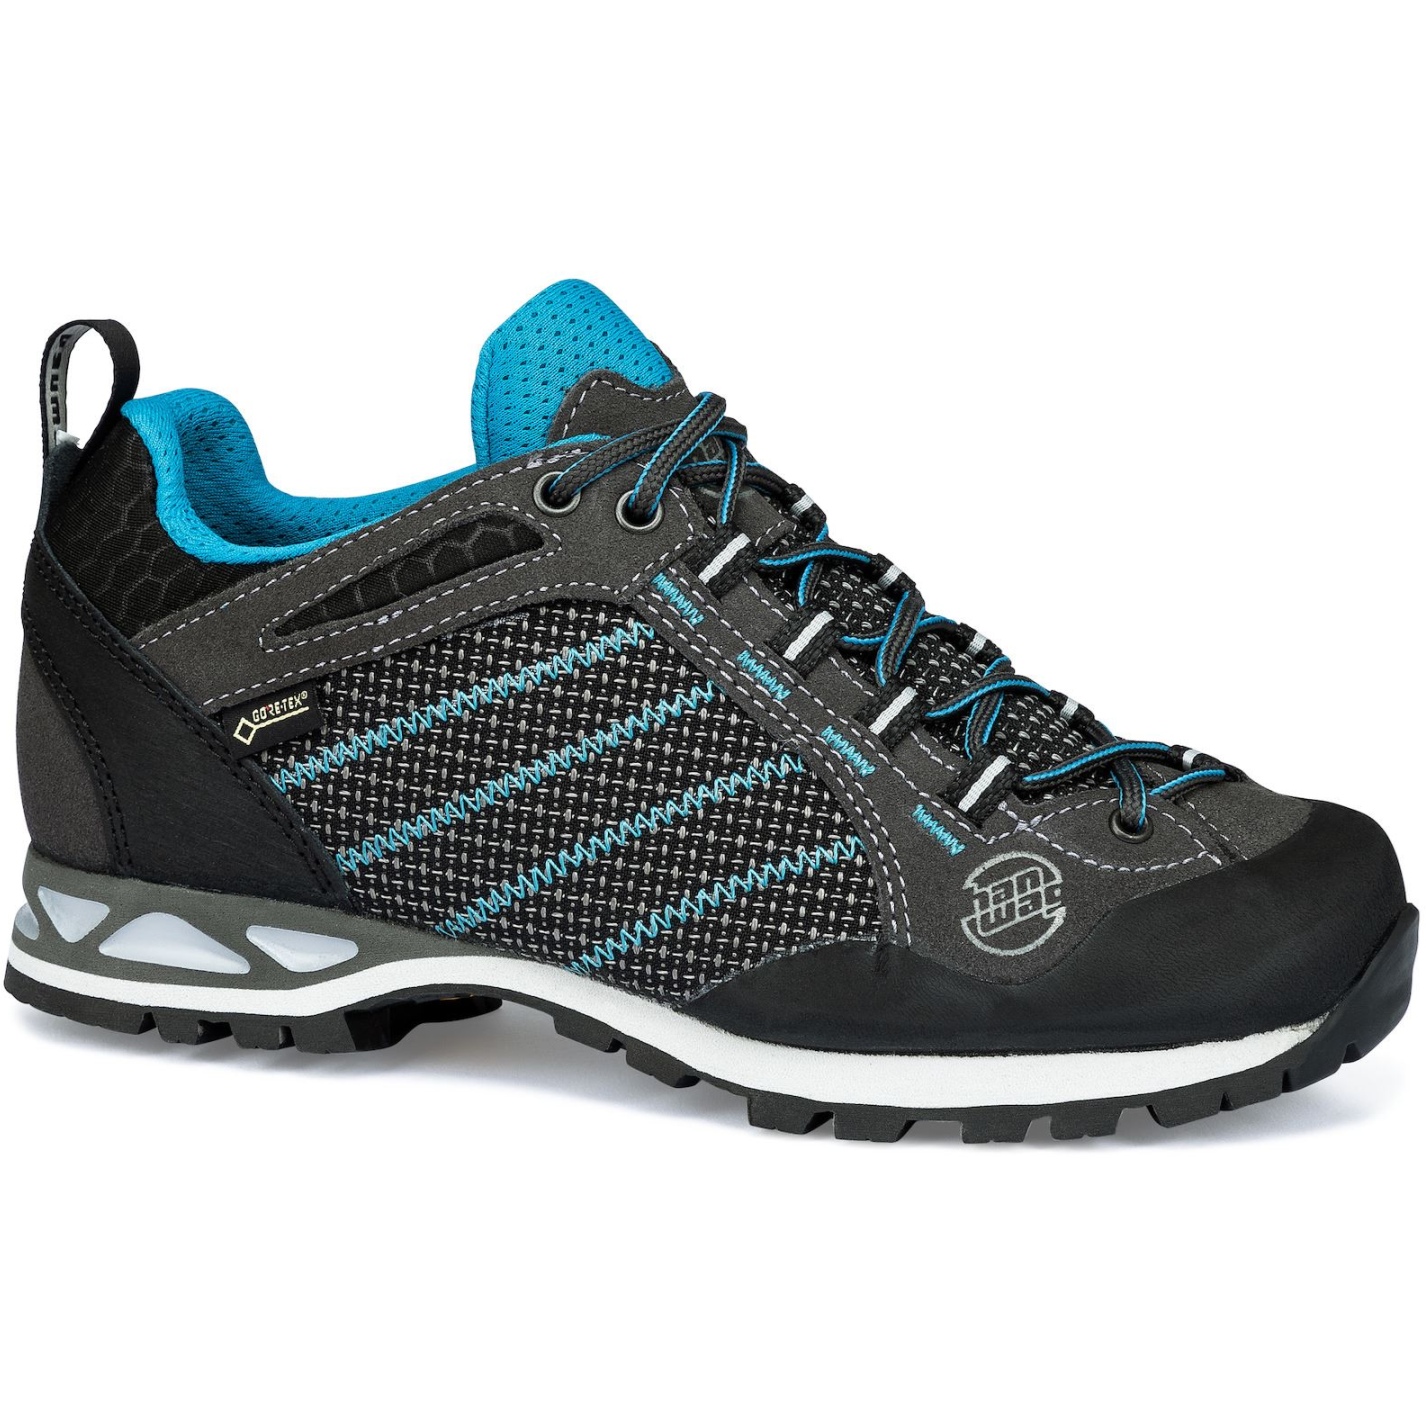 Picture of Hanwag Makra Low Lady GTX Approach Shoes - Asphalt/Ocean